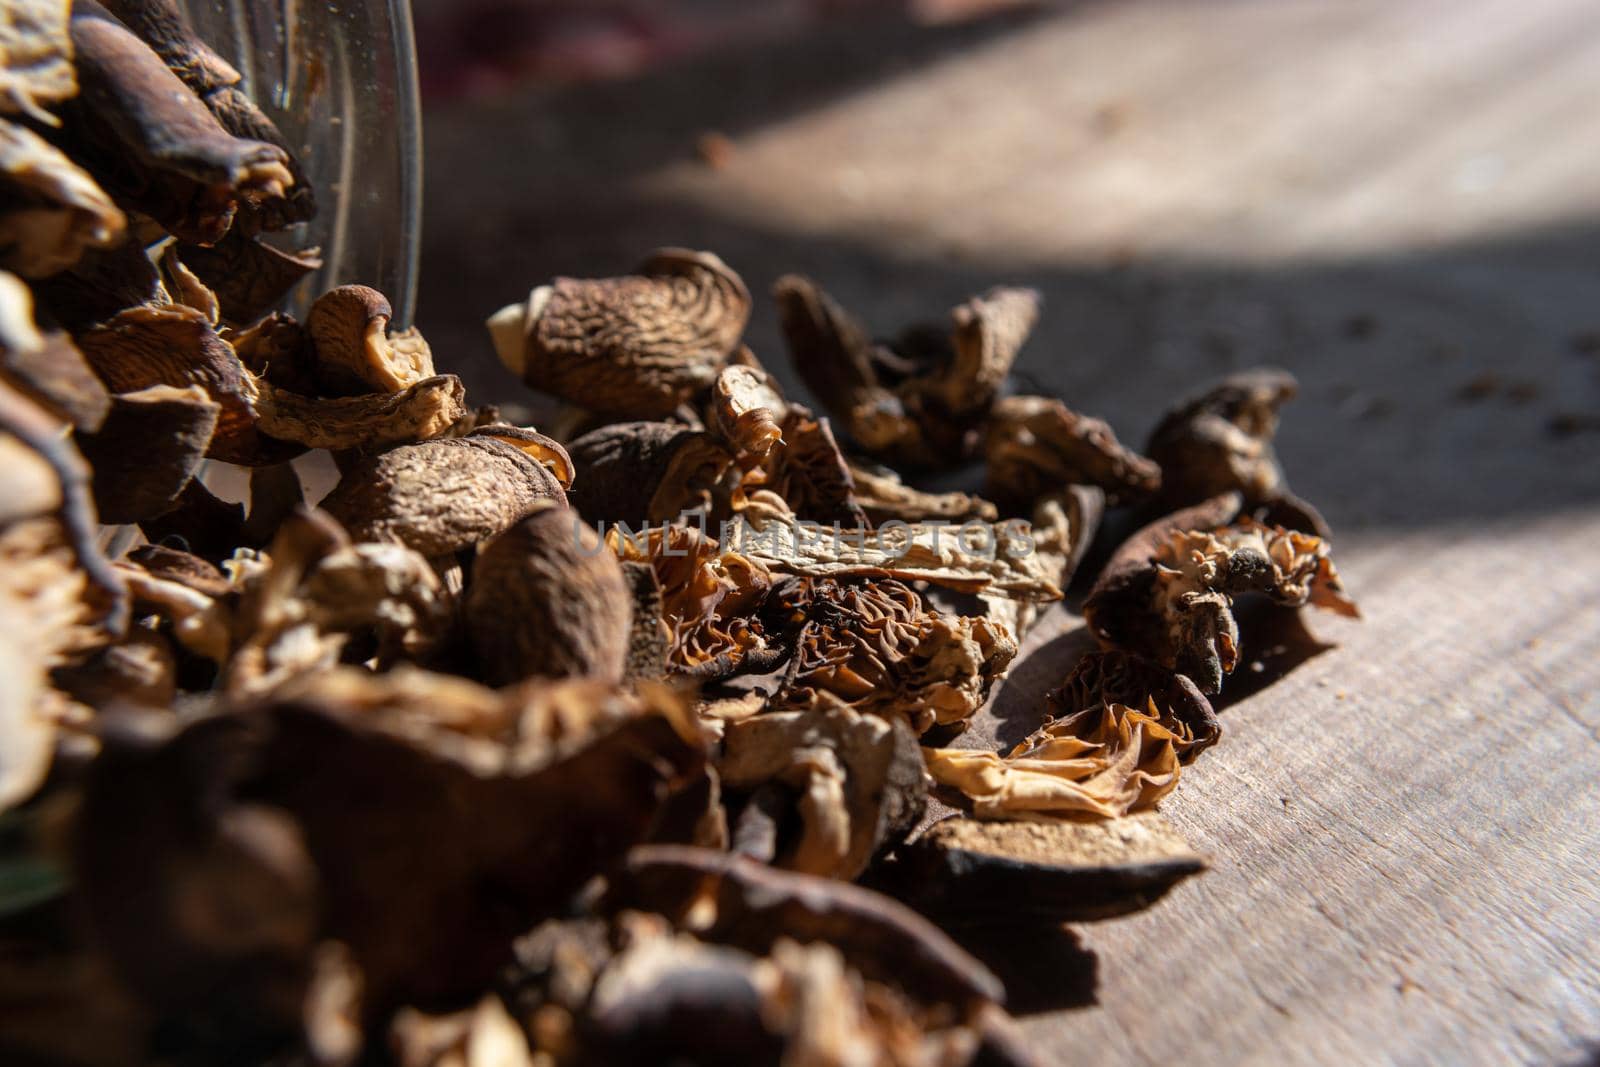 Dried mushrooms scattered from a glass jar on a wooden table illuminated by the sun. Selective focus. Culinary theme.